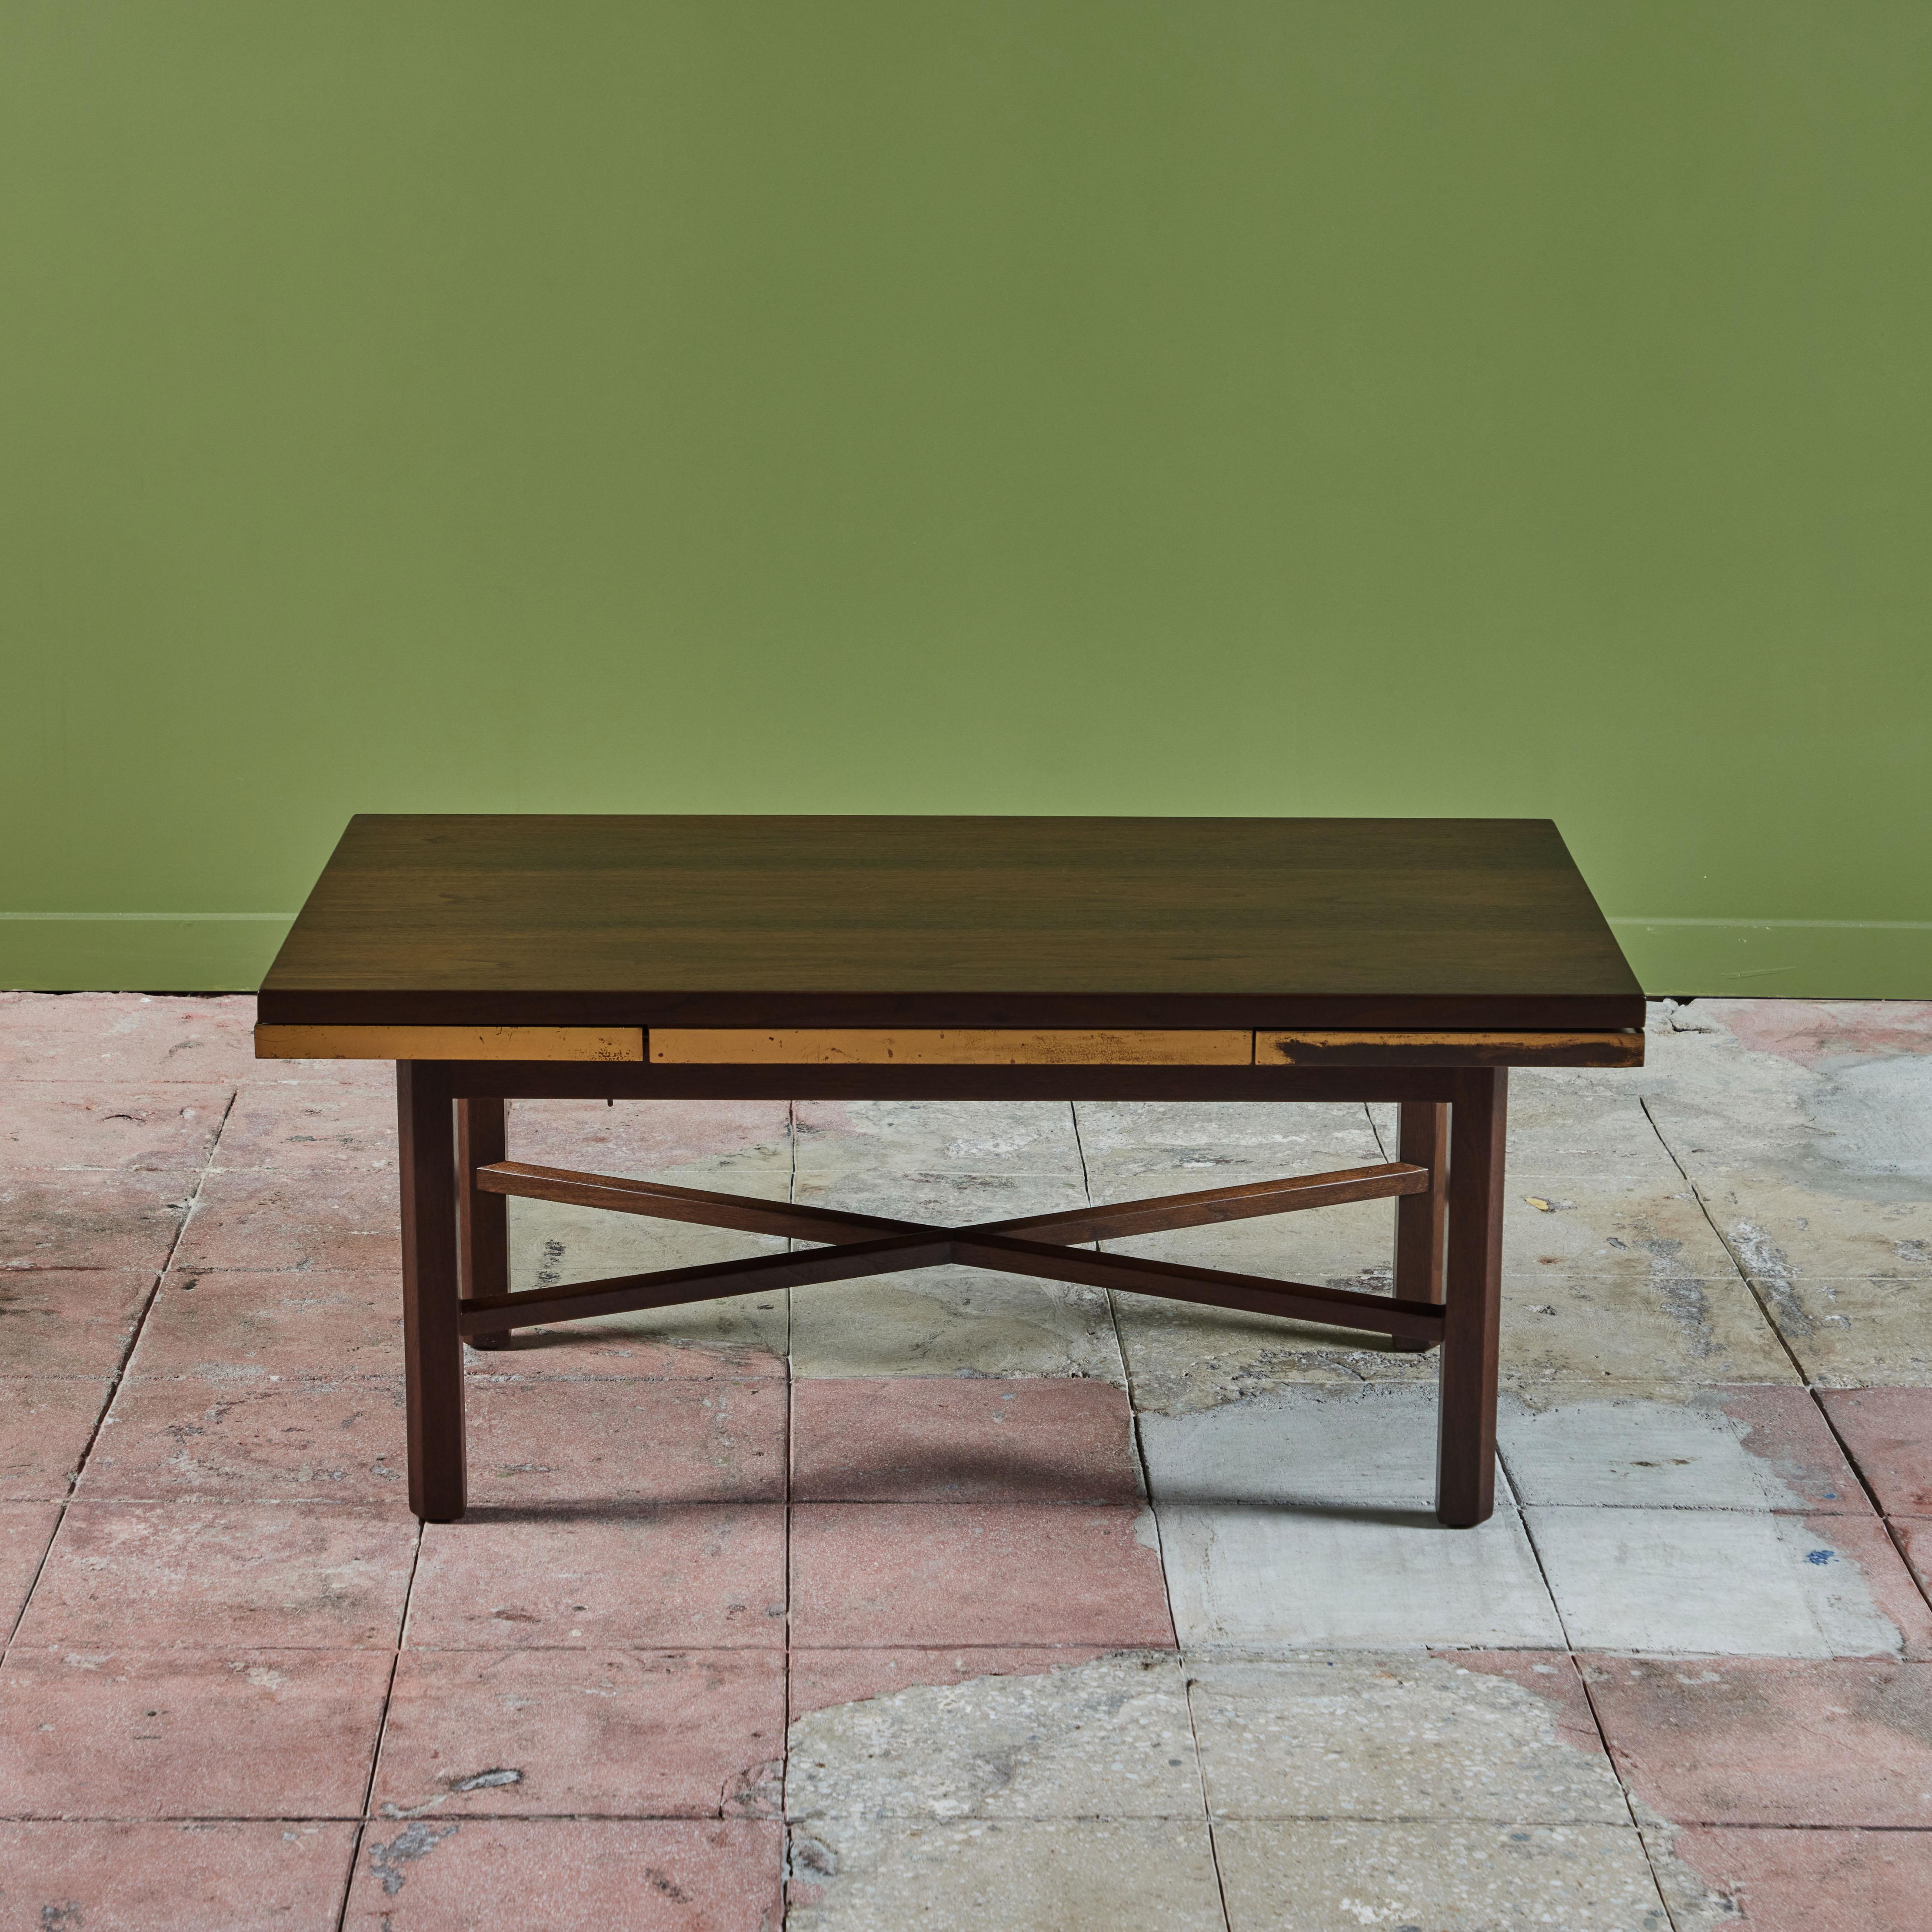 Mid-20th Century Edward Wormley Walnut Coffee Table with Stone Inlay for Dunbar For Sale